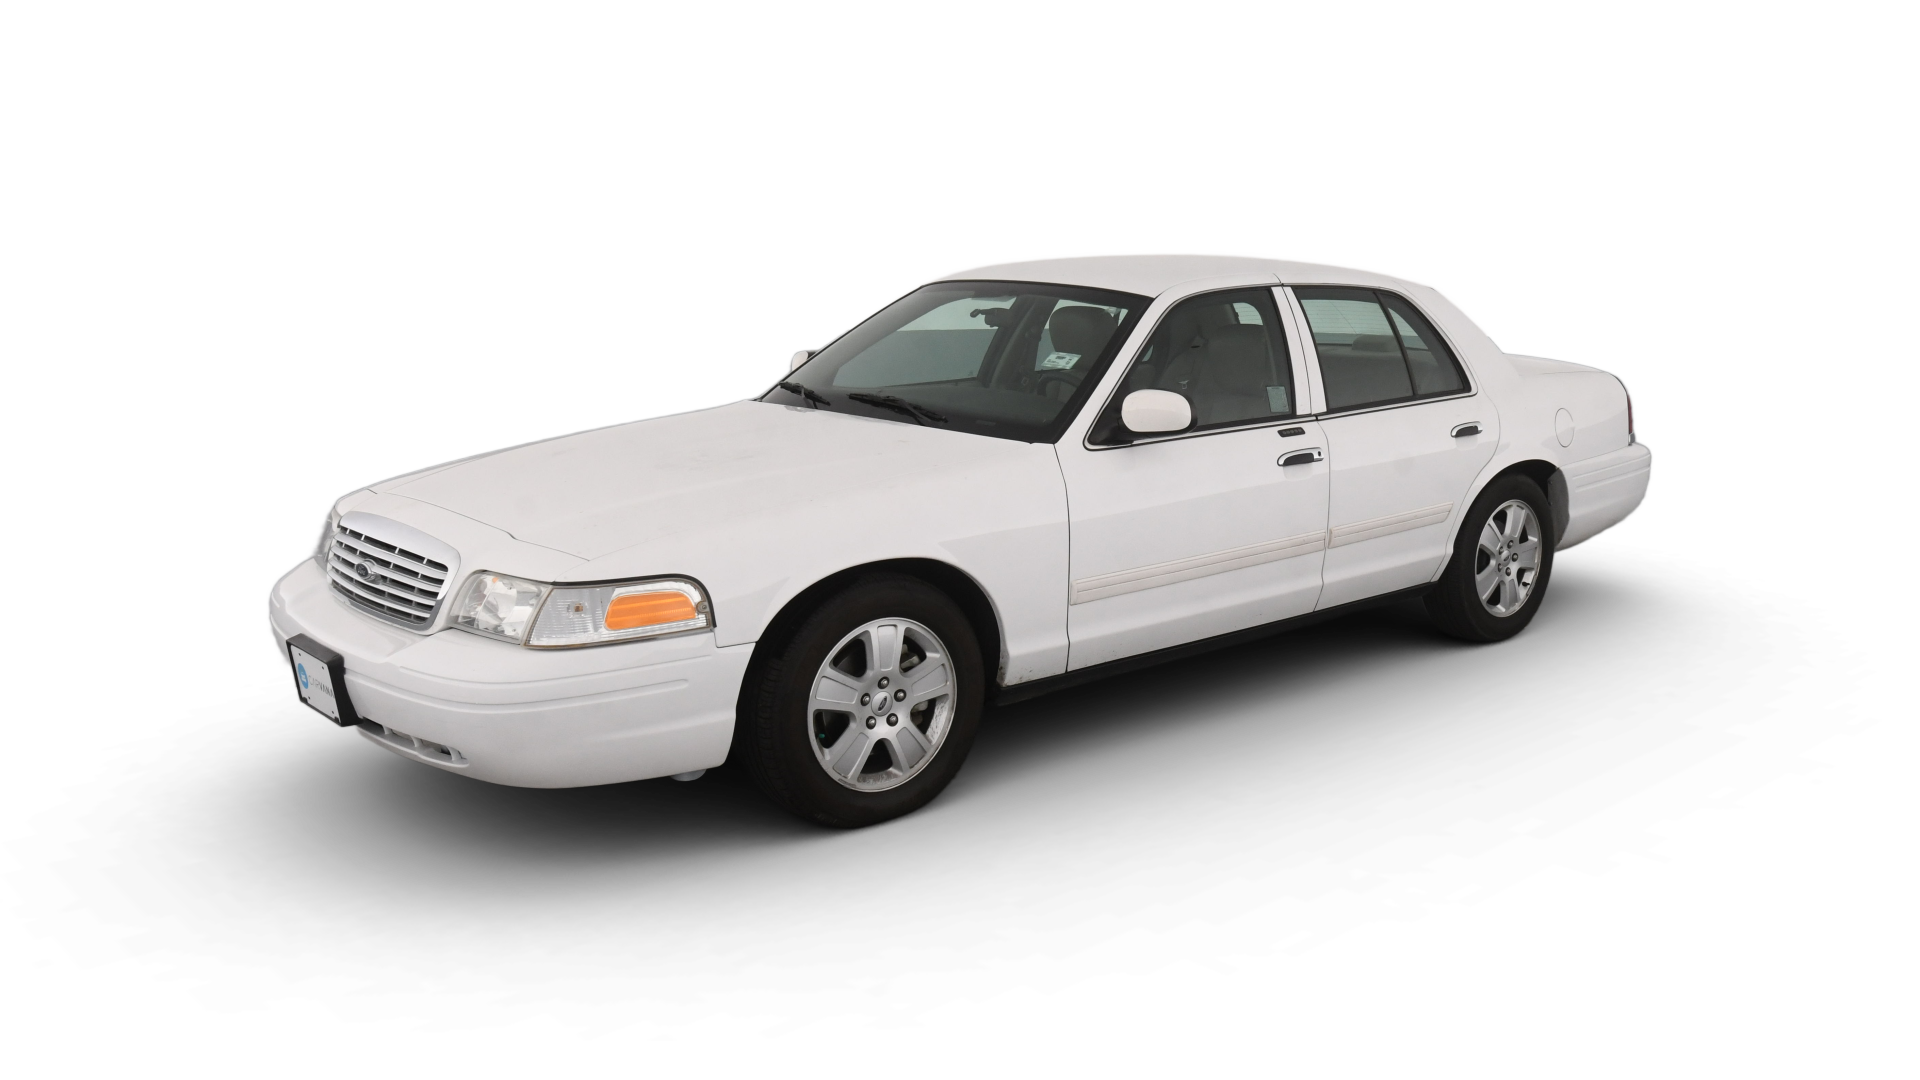 Used 2011 Ford Crown Victoria | Carvana